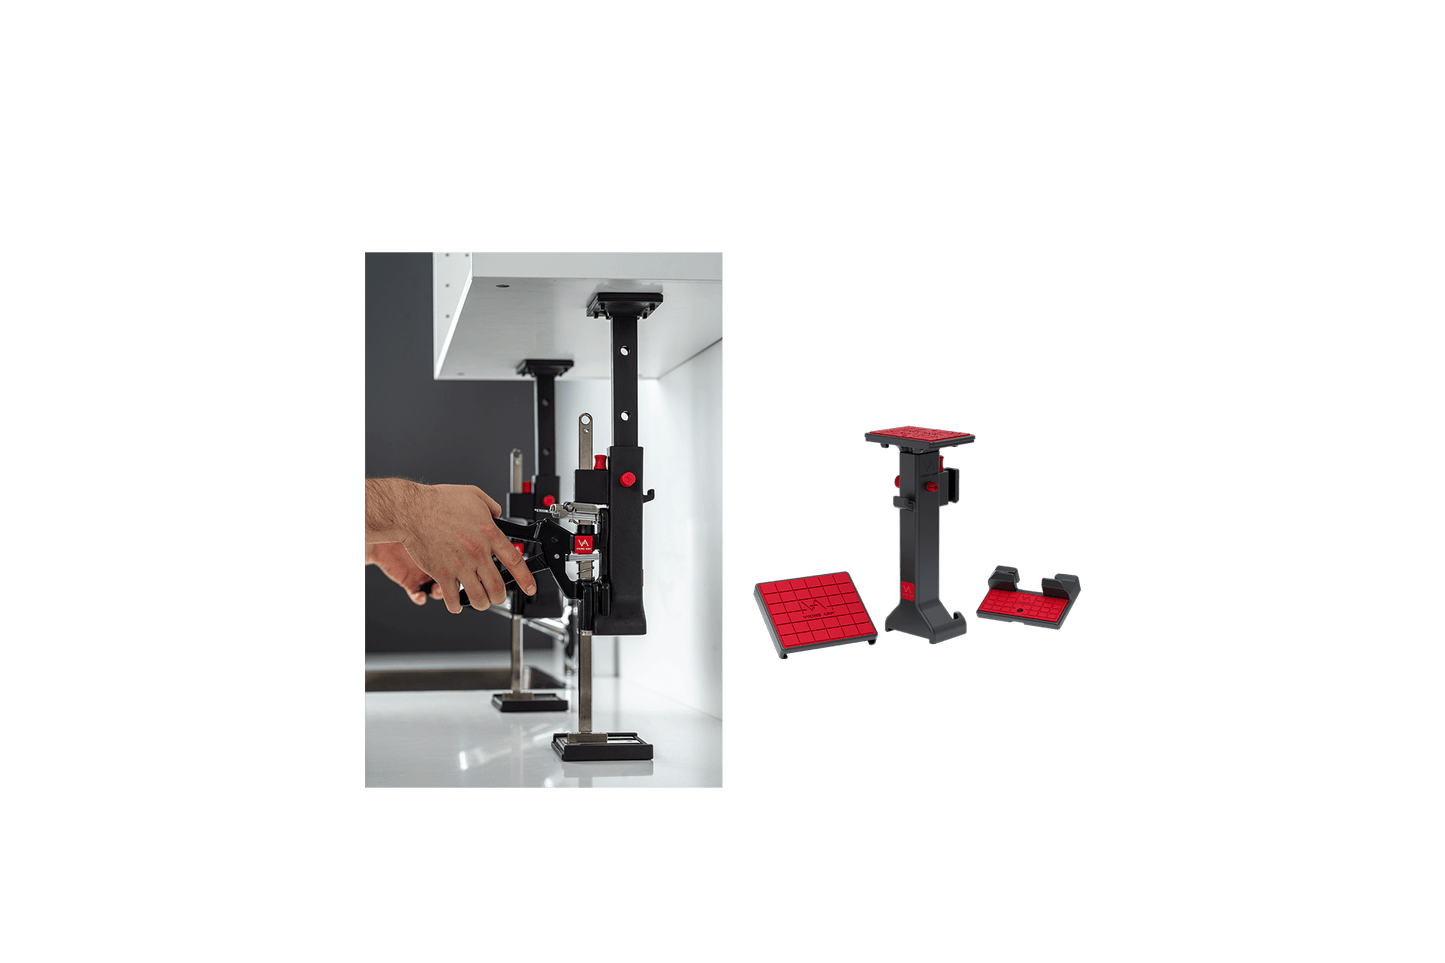 Components of the Viking Arm® CIK, including lightweight fiberglass PA arms and non-slip/non-scratch Base and Lifting Pads, showcasing the kit's dimensions of 243 – 385 x 115 x 104mm and weight of 0.640kg.